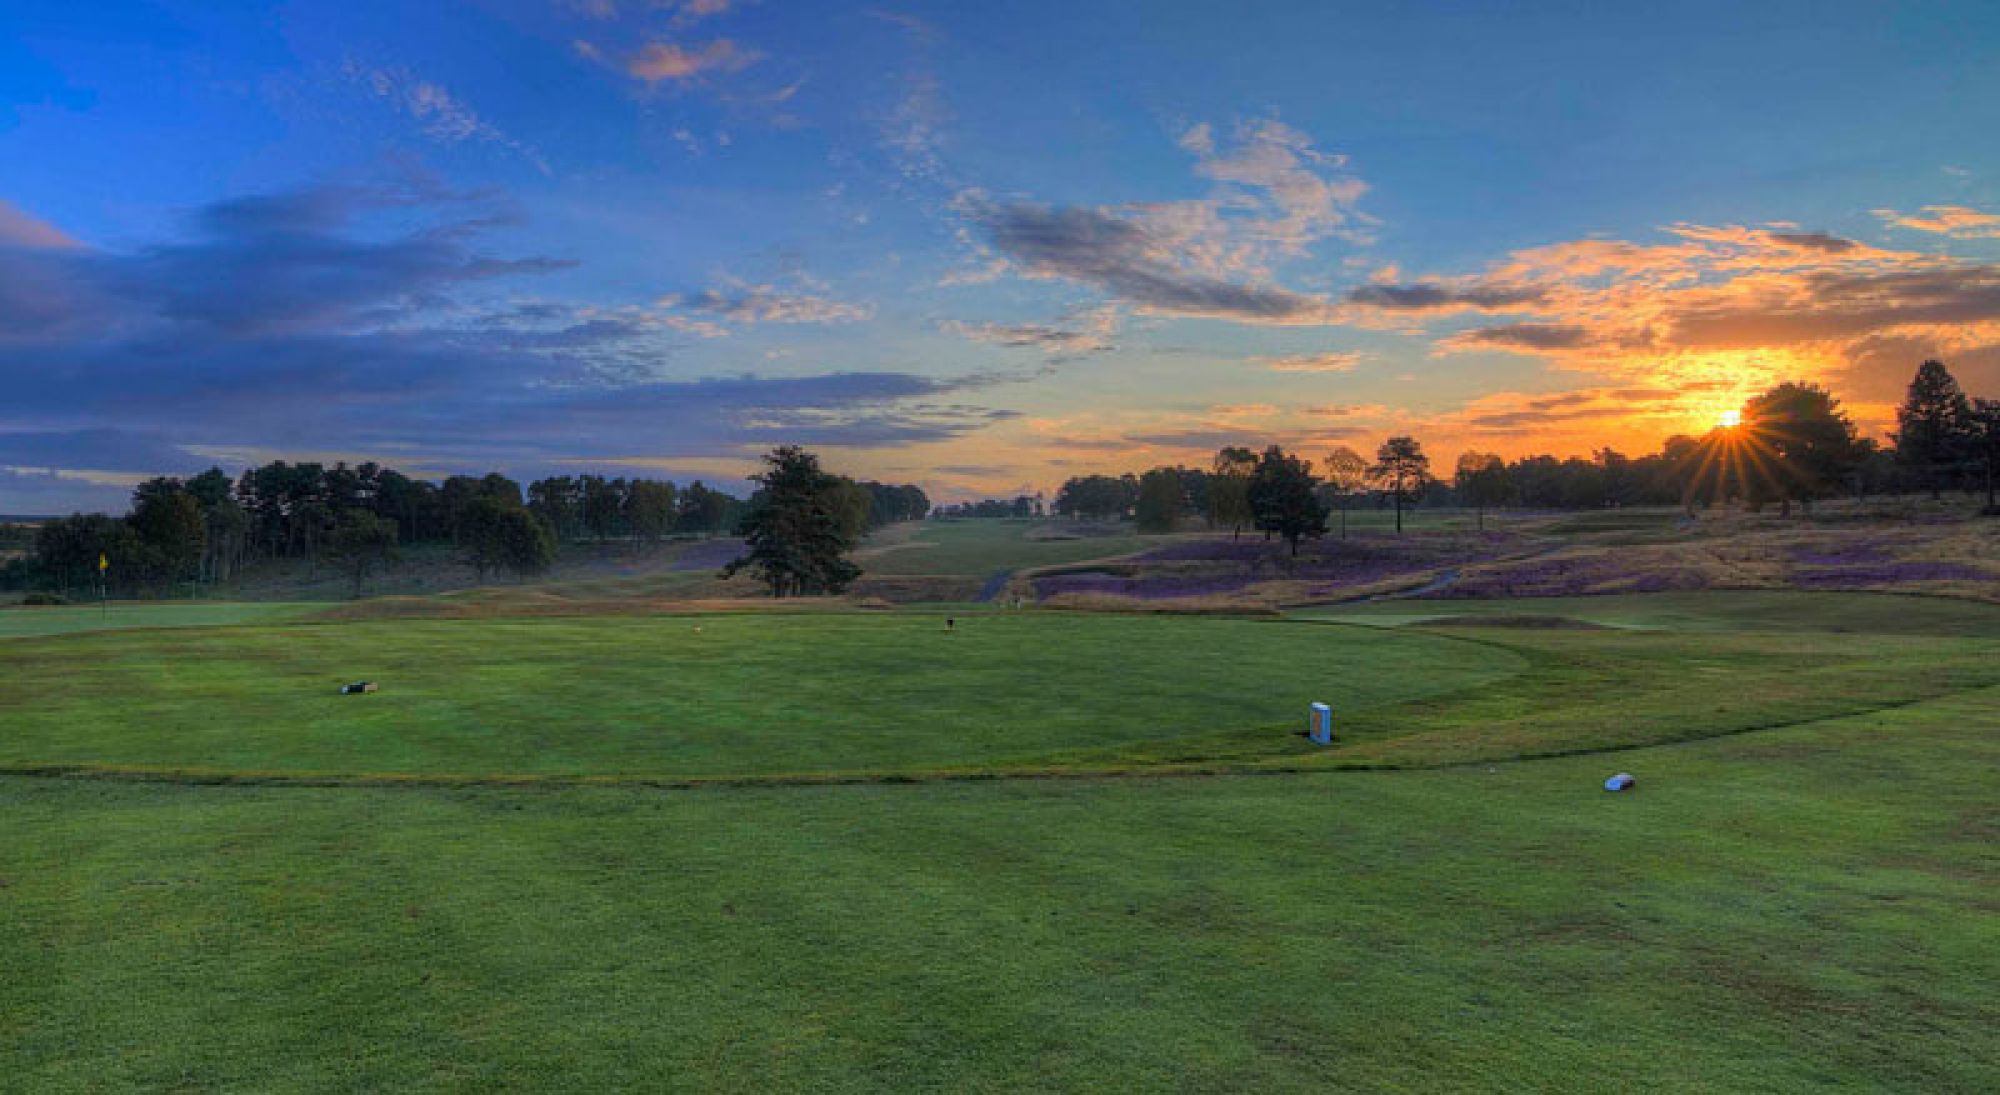 Sherwood Forest Golf Club boasts some of the finest golf course in Nottinghamshire